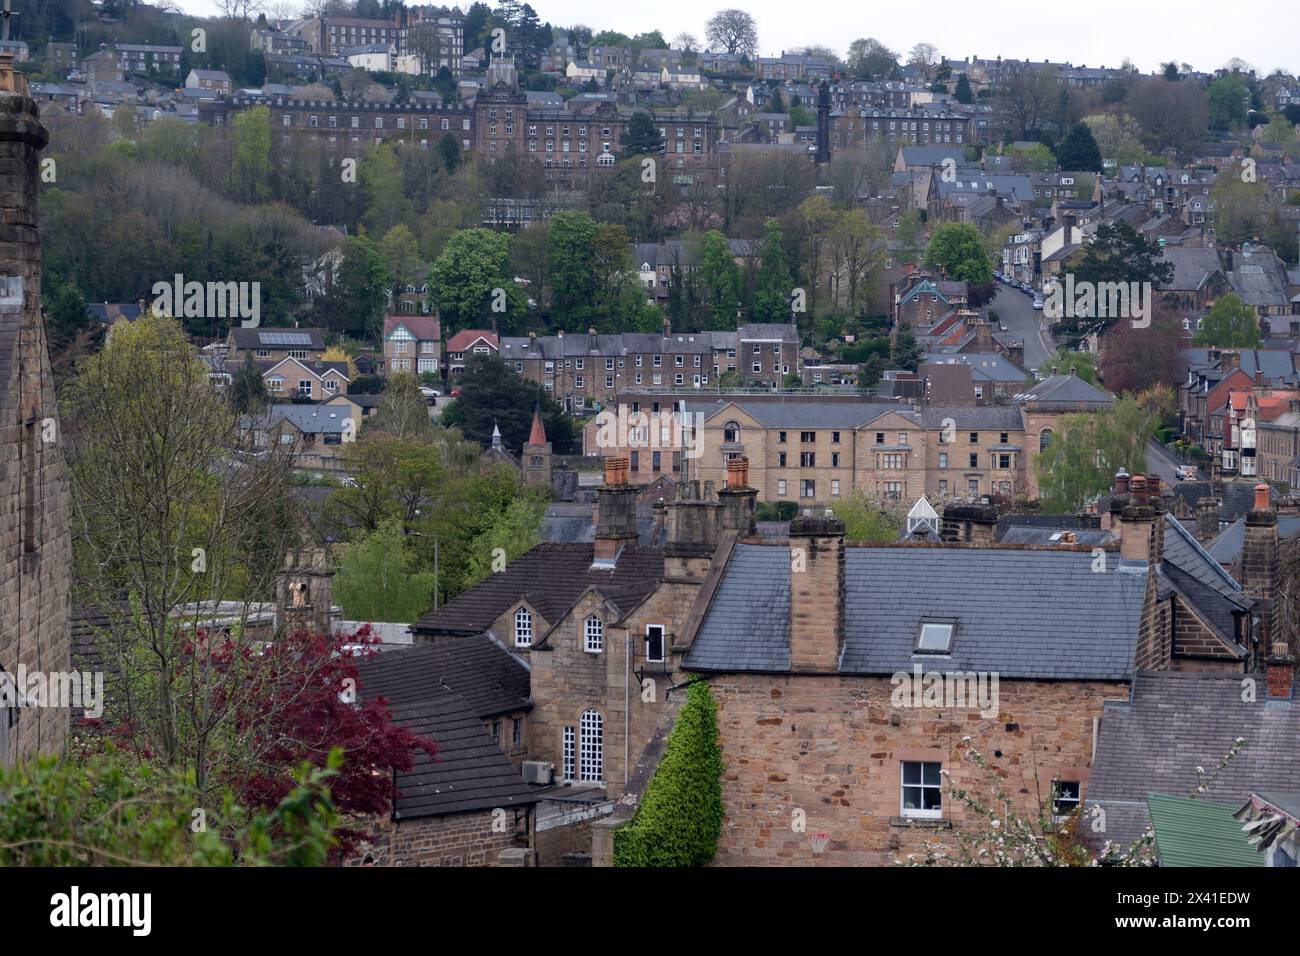 View of the town of Matlock from the surrounding countryside, Peak District, Derby England UK Stock Photo